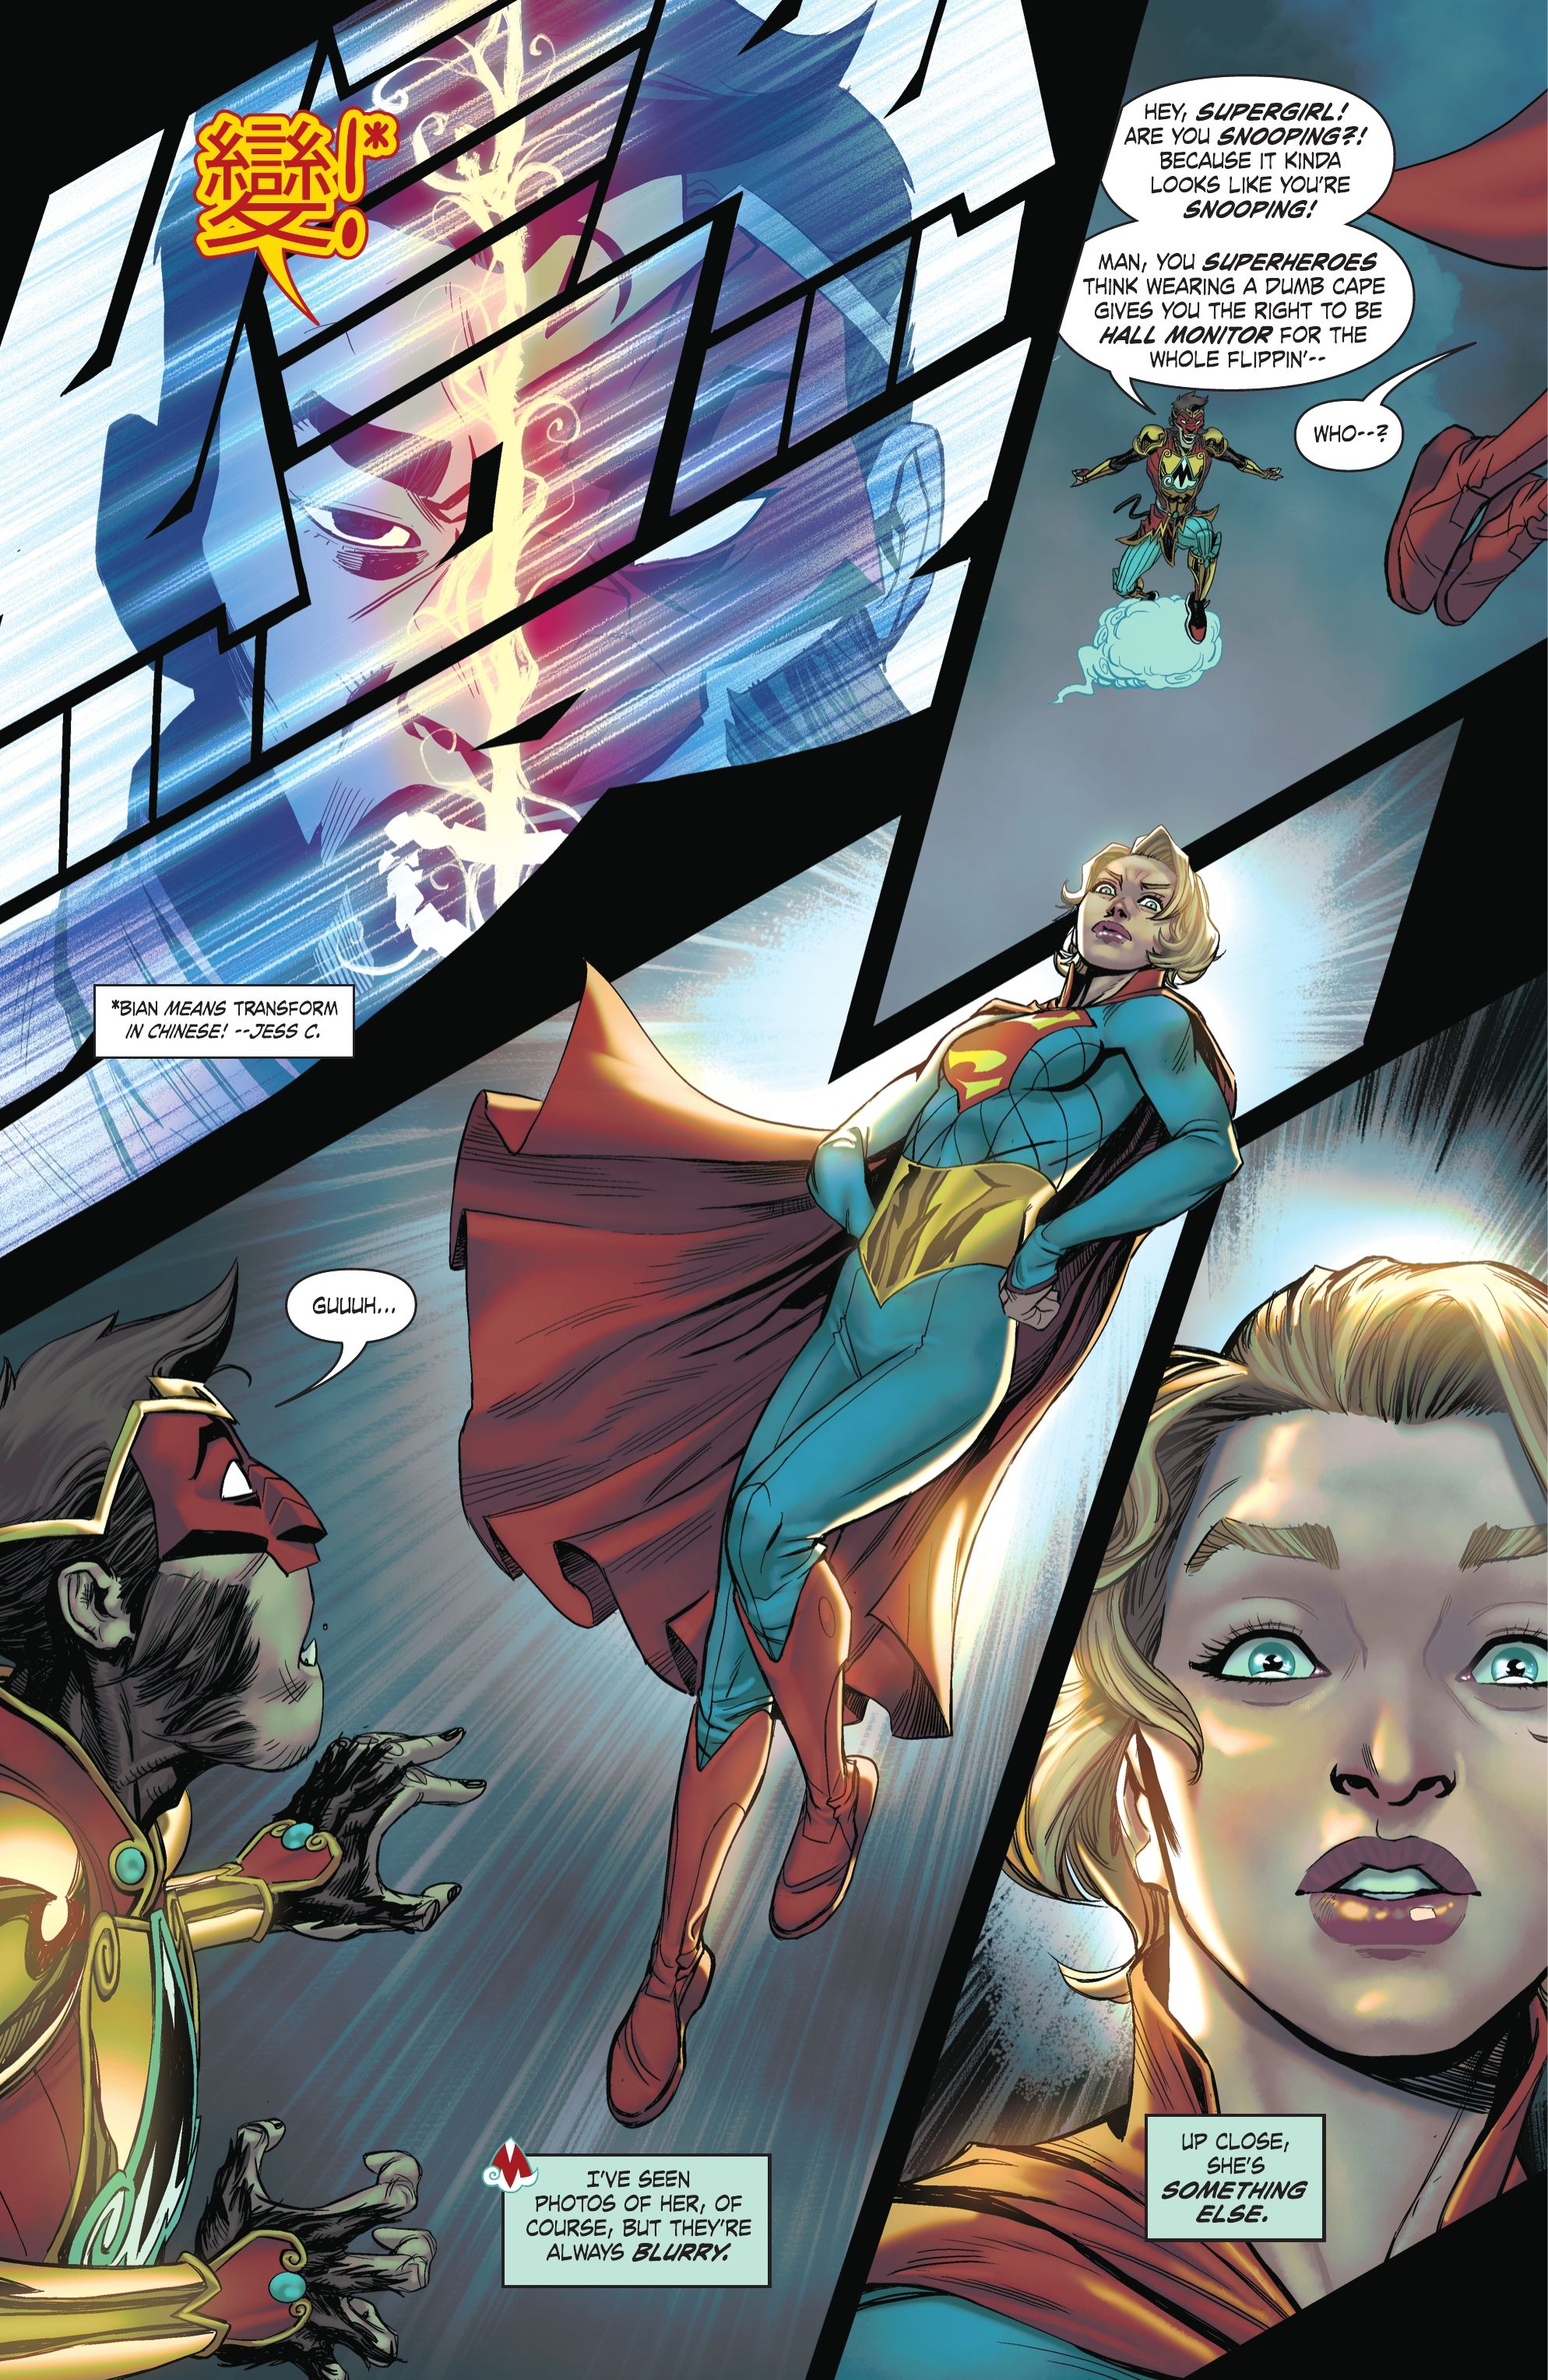 Monkey Prince is immediately smitten with Supergirl